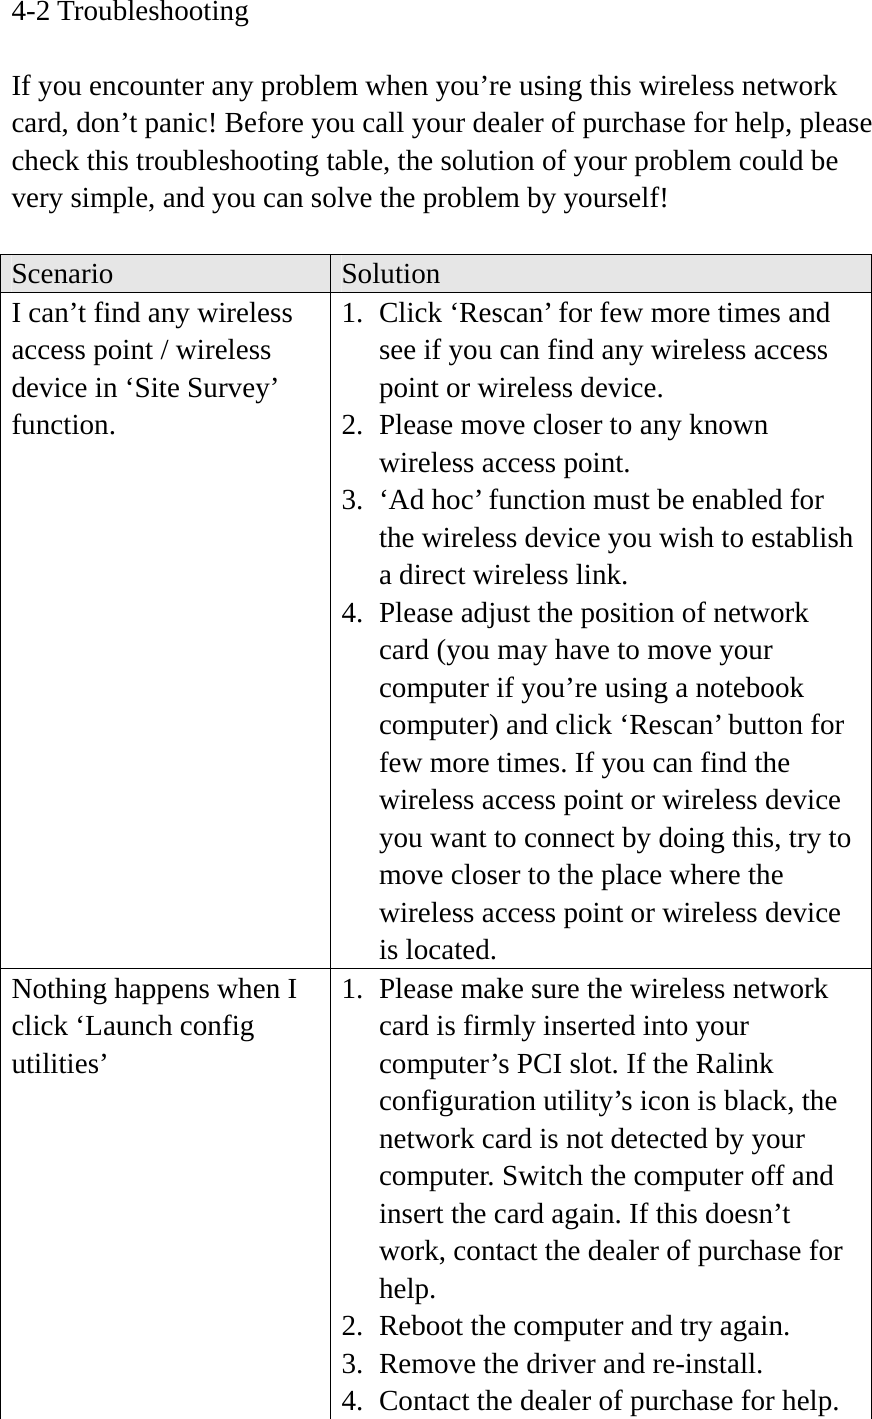 4-2 Troubleshooting  If you encounter any problem when you’re using this wireless network card, don’t panic! Before you call your dealer of purchase for help, please check this troubleshooting table, the solution of your problem could be very simple, and you can solve the problem by yourself!  Scenario  Solution I can’t find any wireless access point / wireless device in ‘Site Survey’ function. 1. Click ‘Rescan’ for few more times and see if you can find any wireless access point or wireless device. 2. Please move closer to any known wireless access point. 3. ‘Ad hoc’ function must be enabled for the wireless device you wish to establish a direct wireless link. 4. Please adjust the position of network card (you may have to move your computer if you’re using a notebook computer) and click ‘Rescan’ button for few more times. If you can find the wireless access point or wireless device you want to connect by doing this, try to move closer to the place where the wireless access point or wireless device is located. Nothing happens when I click ‘Launch config utilities’ 1. Please make sure the wireless network card is firmly inserted into your computer’s PCI slot. If the Ralink configuration utility’s icon is black, the network card is not detected by your computer. Switch the computer off and insert the card again. If this doesn’t work, contact the dealer of purchase for help. 2. Reboot the computer and try again. 3. Remove the driver and re-install. 4. Contact the dealer of purchase for help. 